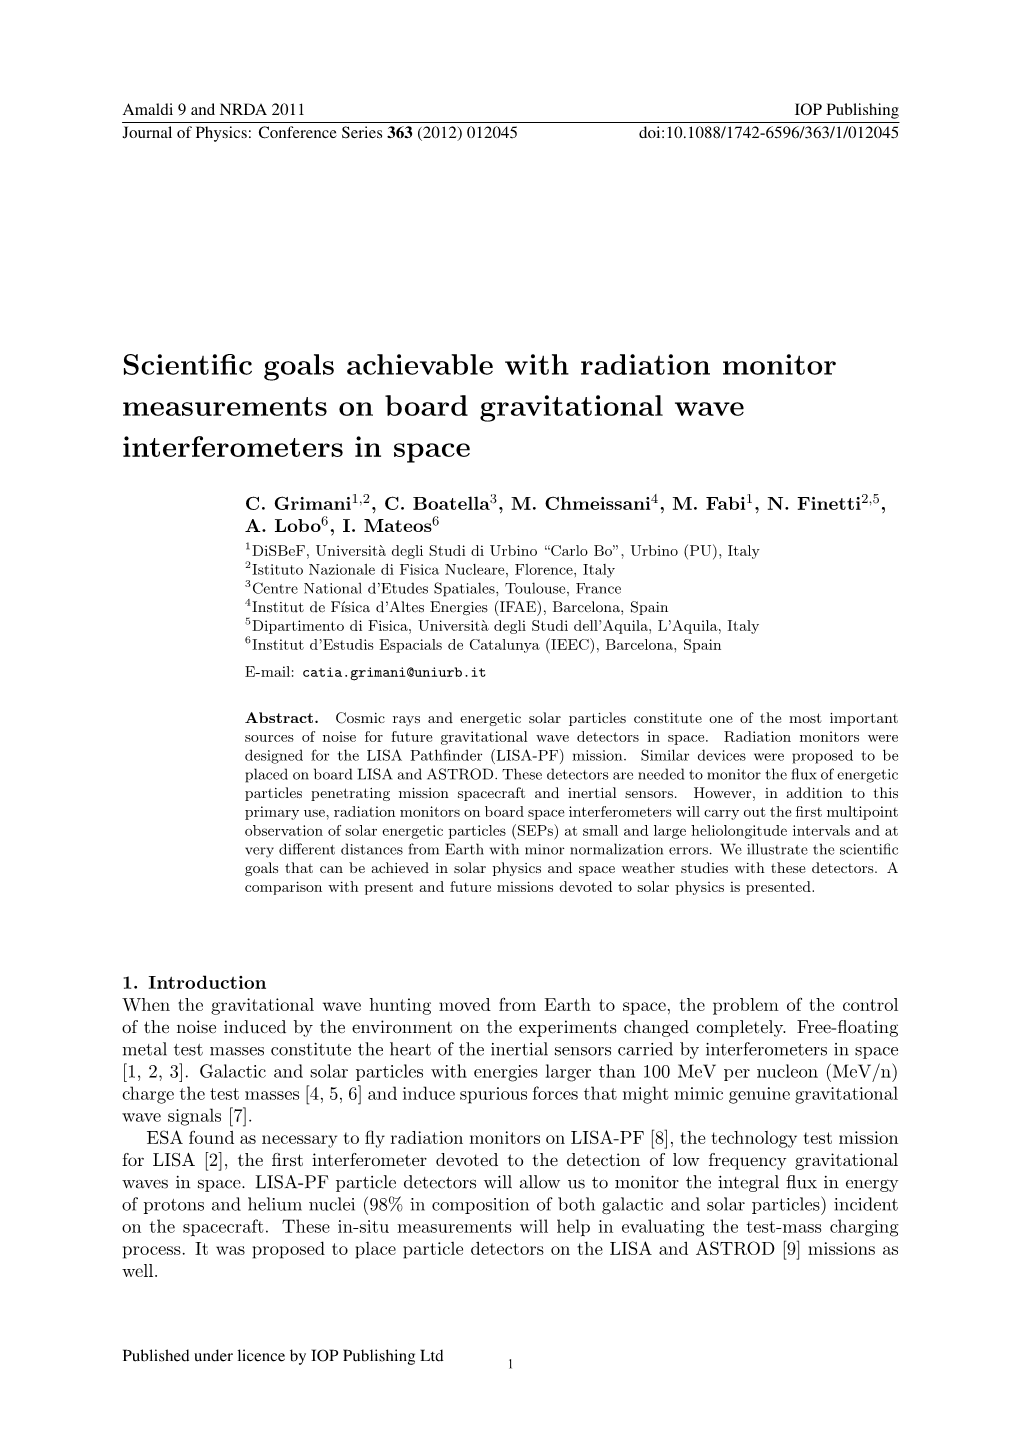 Scientific Goals Achievable with Radiation Monitor Measurements on Board Gravitational Wave Interferometers in Space